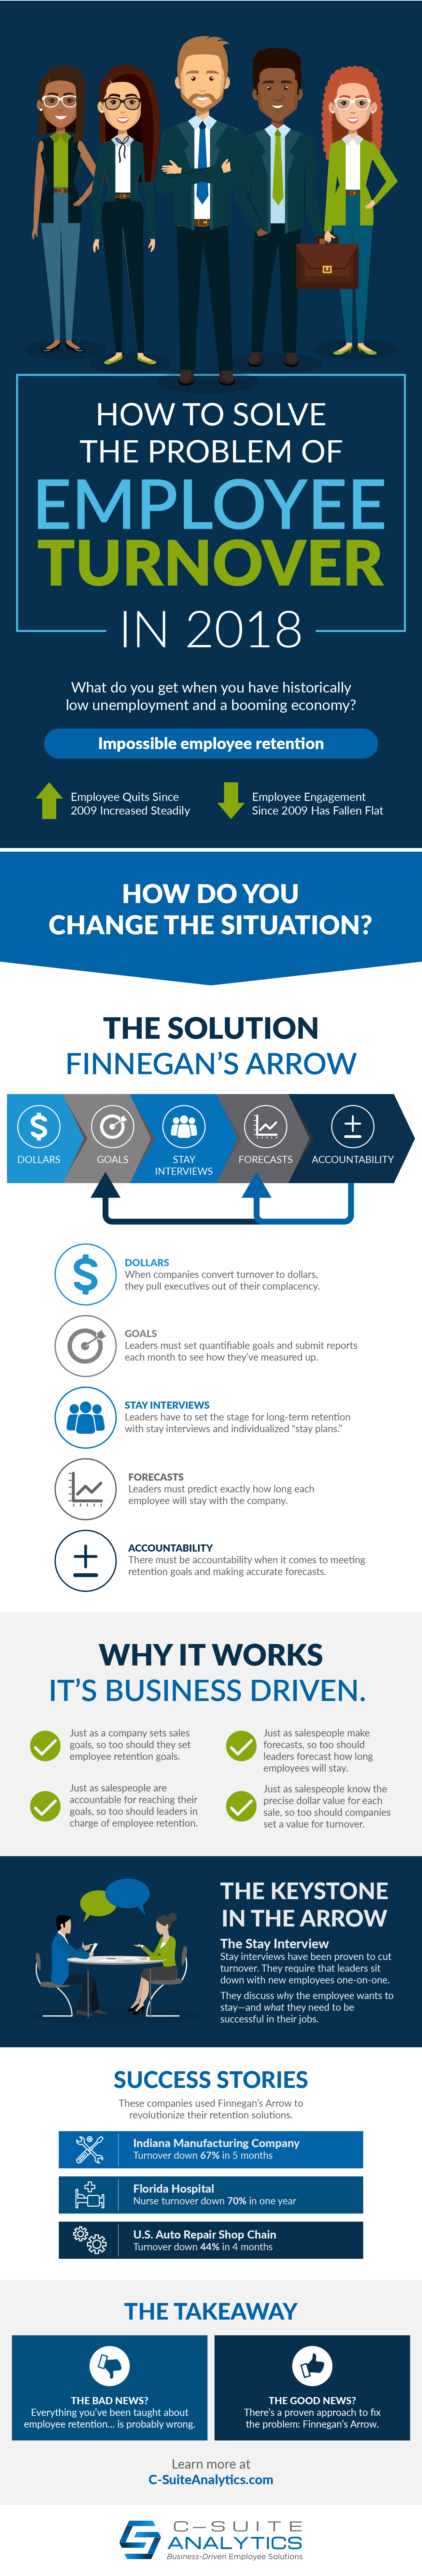 how to solve employee turnover in 2018 infographic